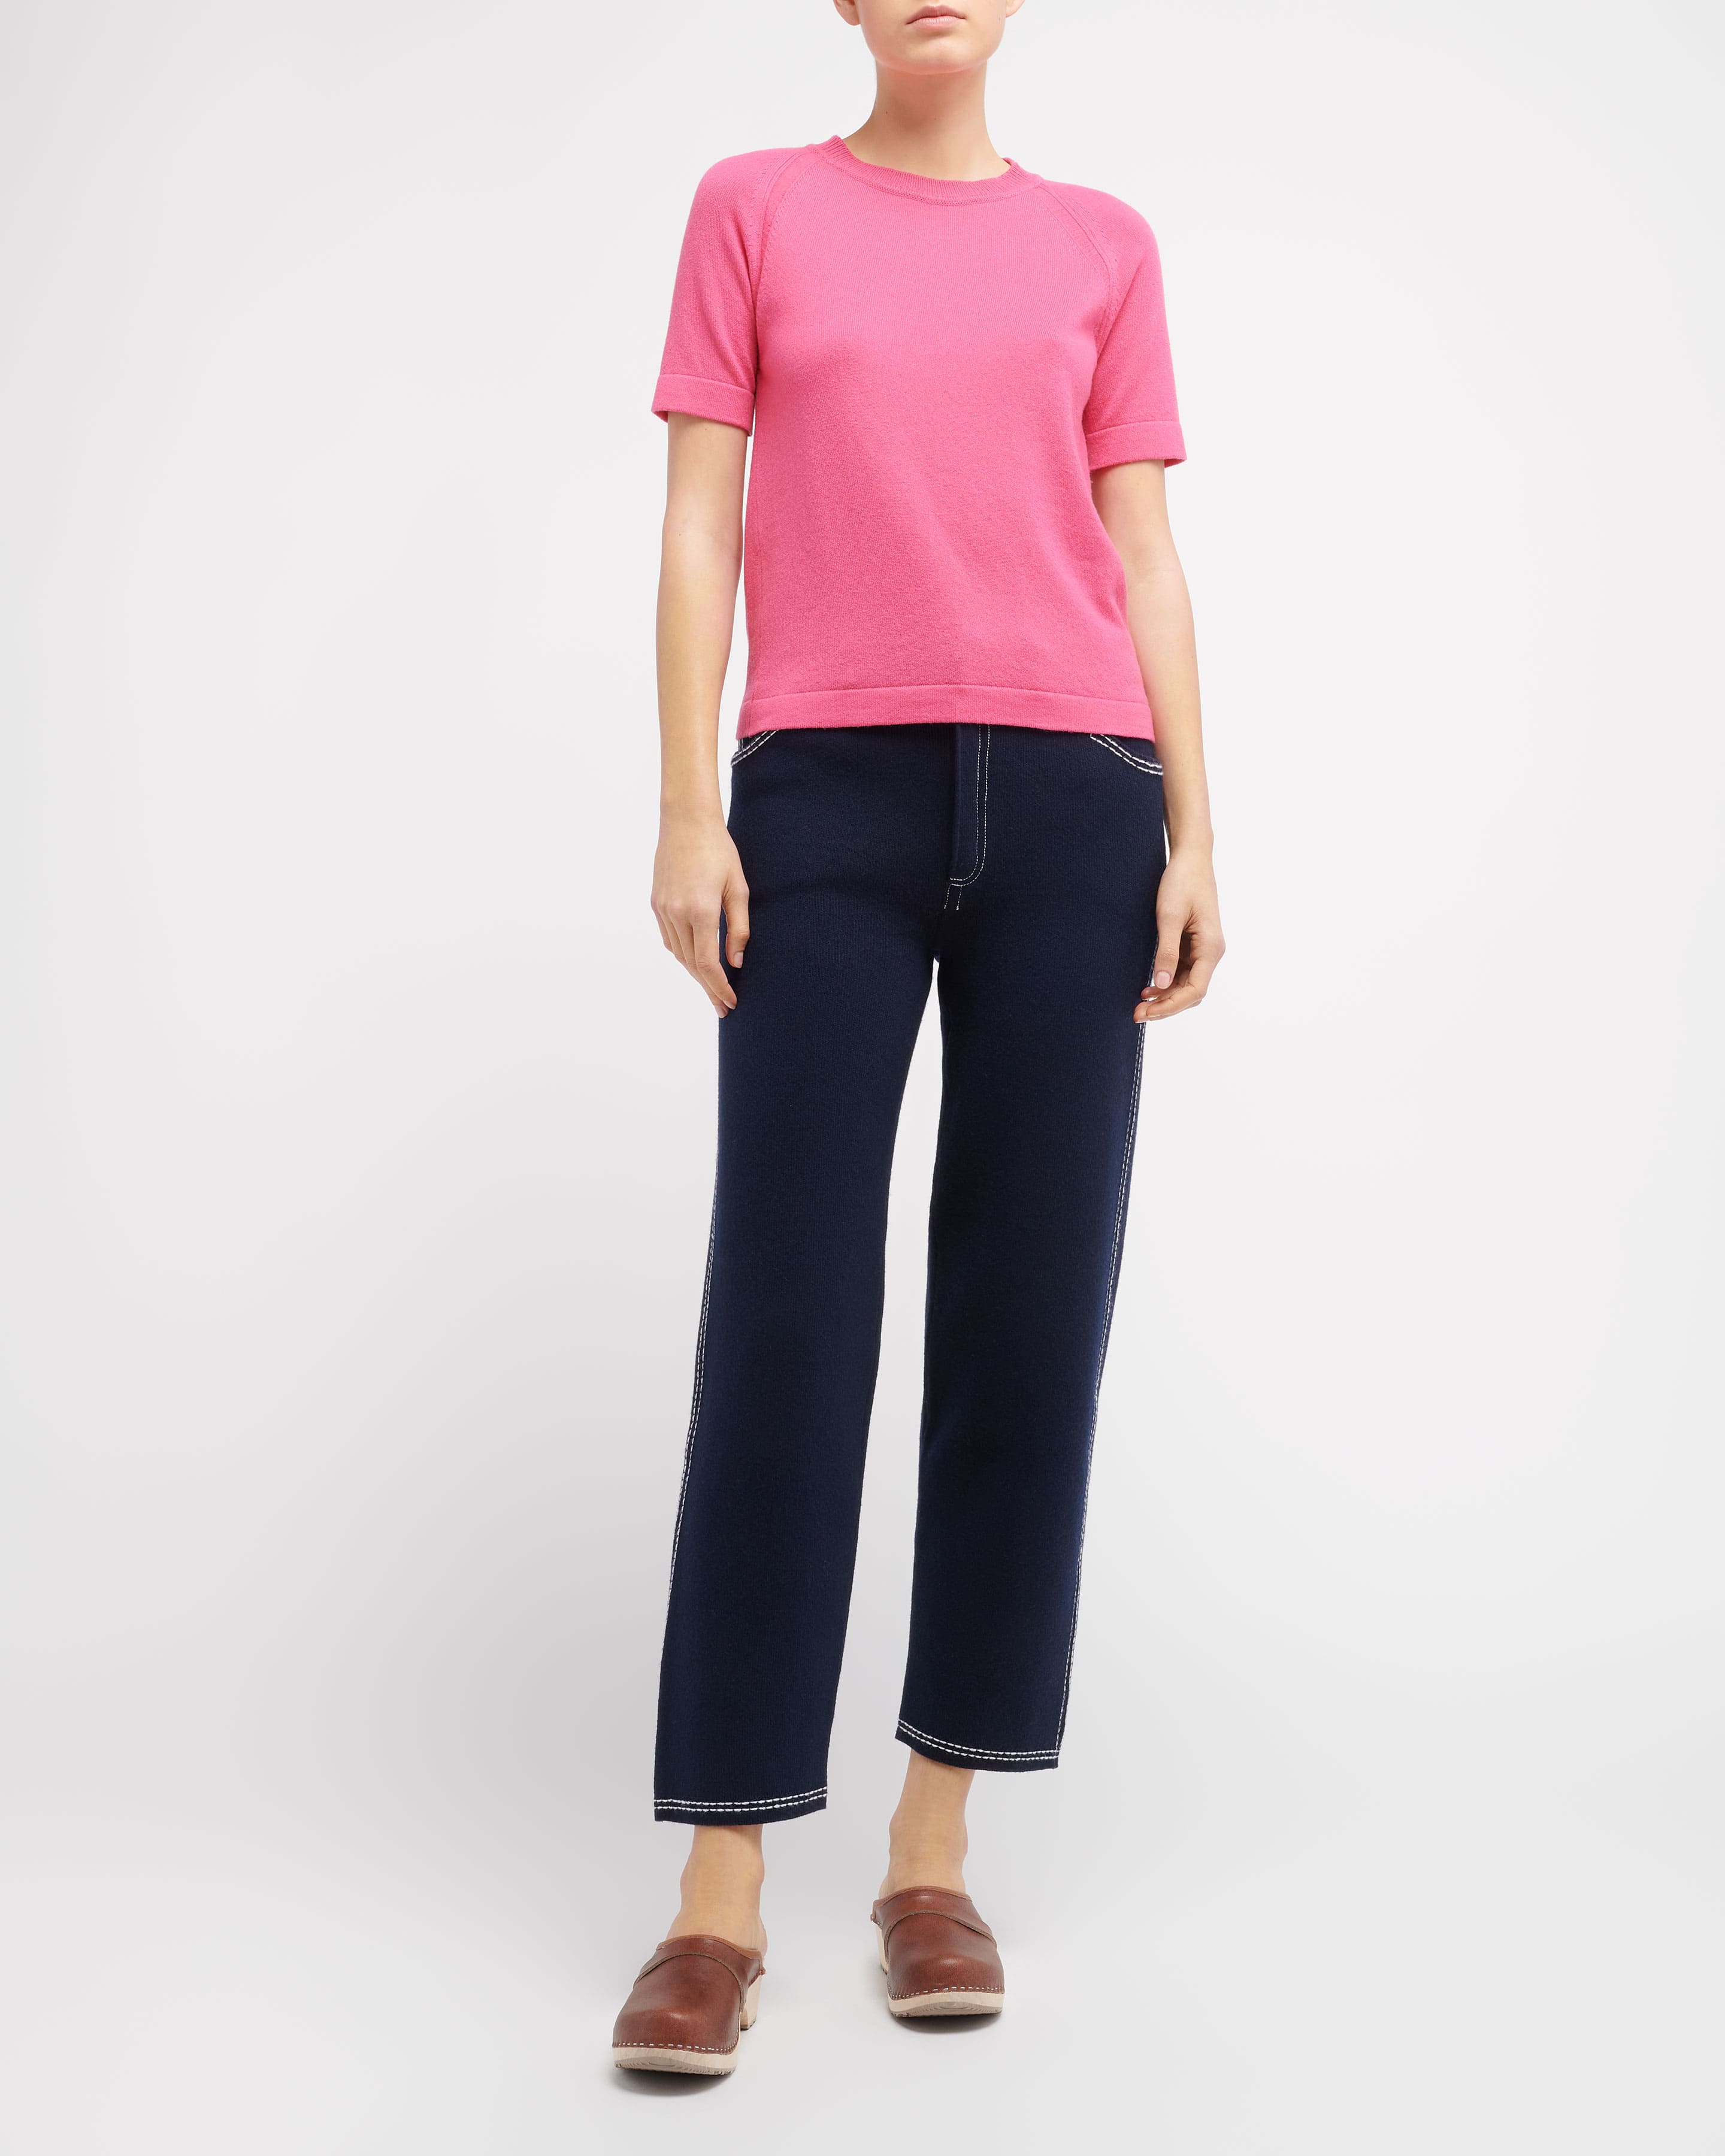 Barrie short-sleeve cashmere top - Pink